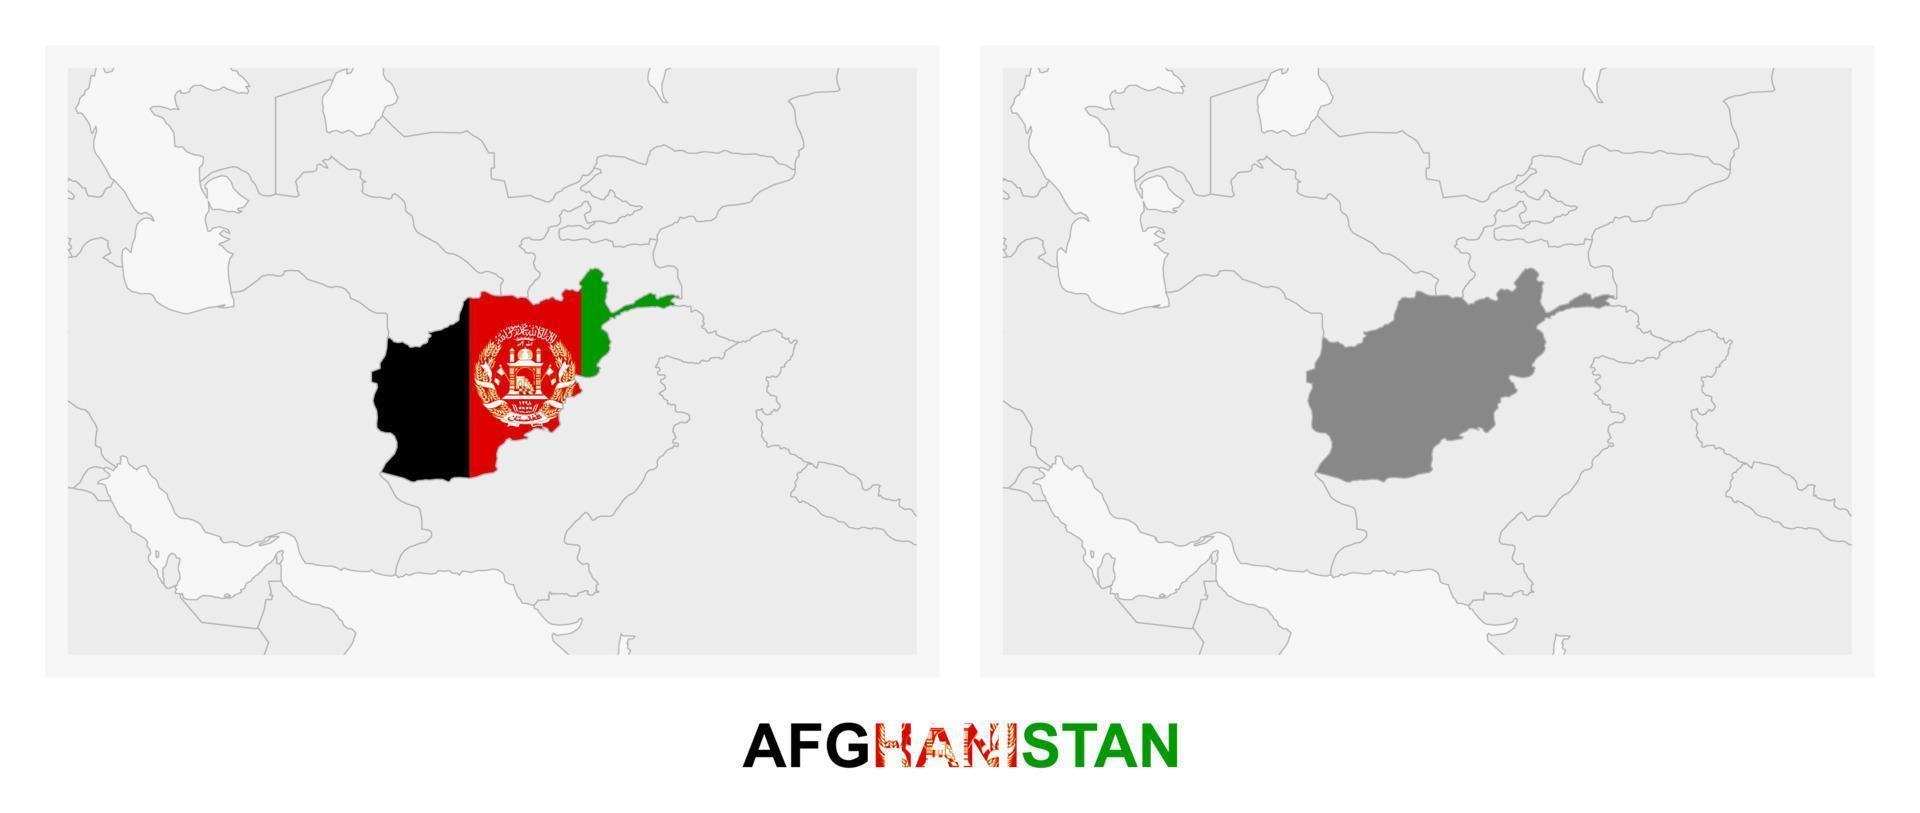 Two versions of the map of Afghanistan, with the flag of Afghanistan and highlighted in dark grey. vector